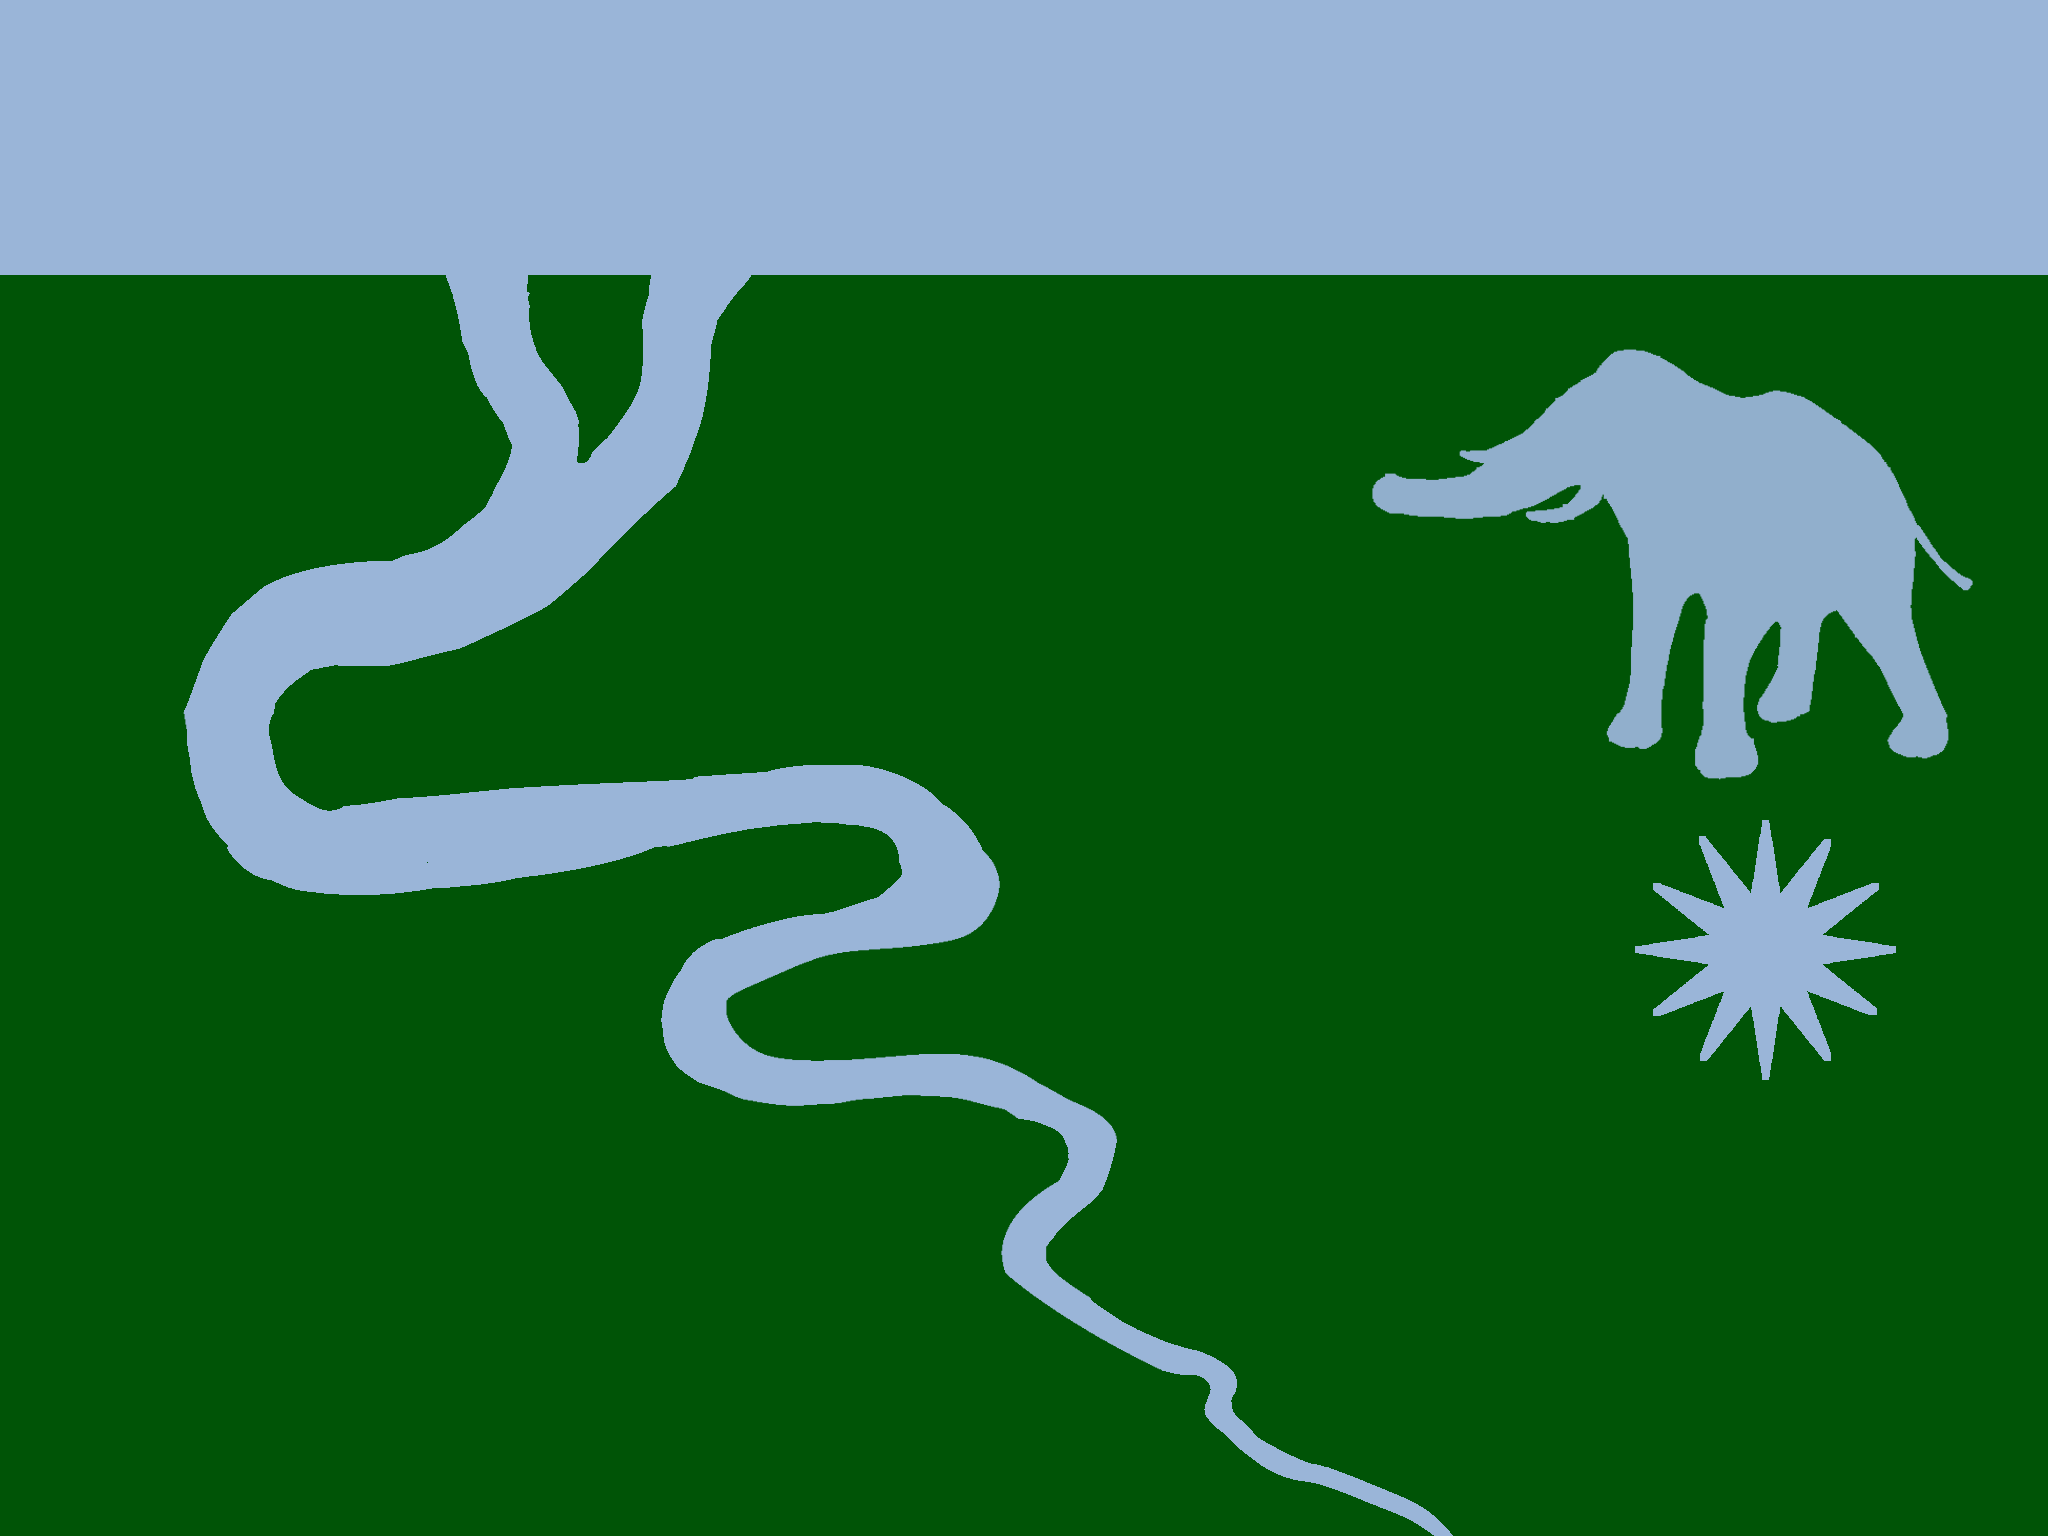 A dark green flag with a narrow blue stripe at the top. In the green area there is a meandering light blue river on the left and a light blue silhouette of an elephant above a twelve pointed star on the right.